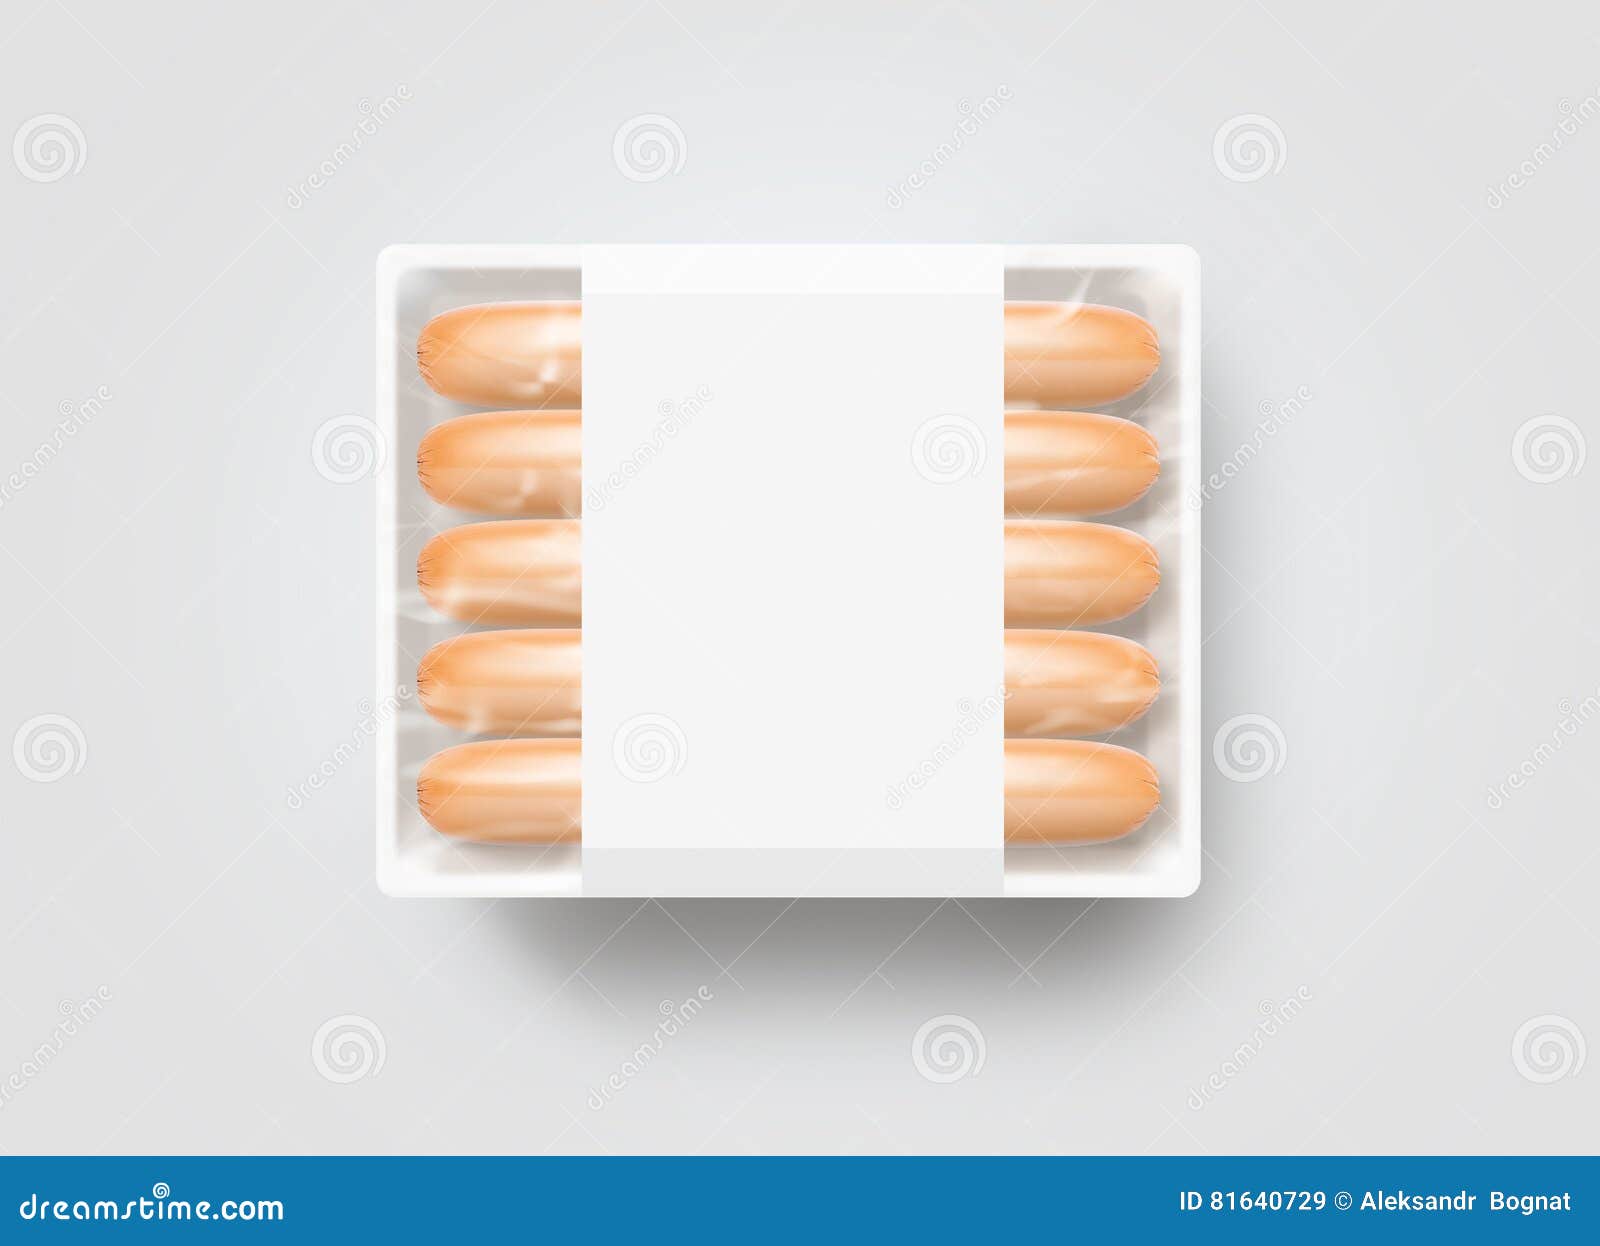 Download Sausages In Blank White Plastic Disposable Box Mockup ...